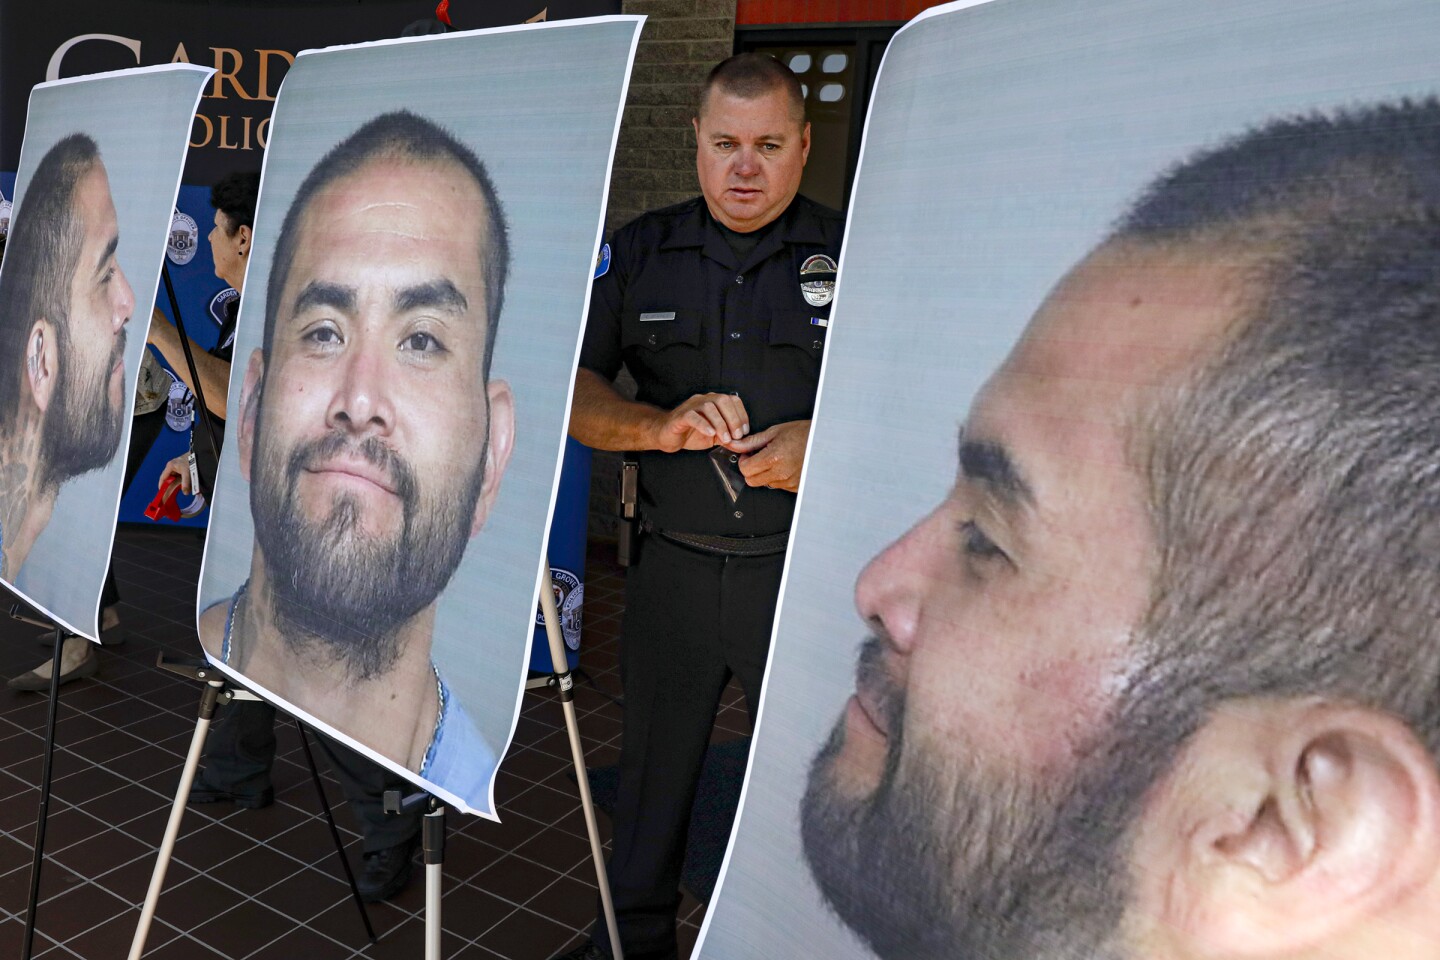 GARDEN GROVE, CA - AUGUST 08, 2019 — Cpl. Charles Starnes displays the photos of suspect Zachary Castaneda prior to a 1 pm press conference at Garden Grove police headquarters. (Irfan Khan/Los Angeles Times)